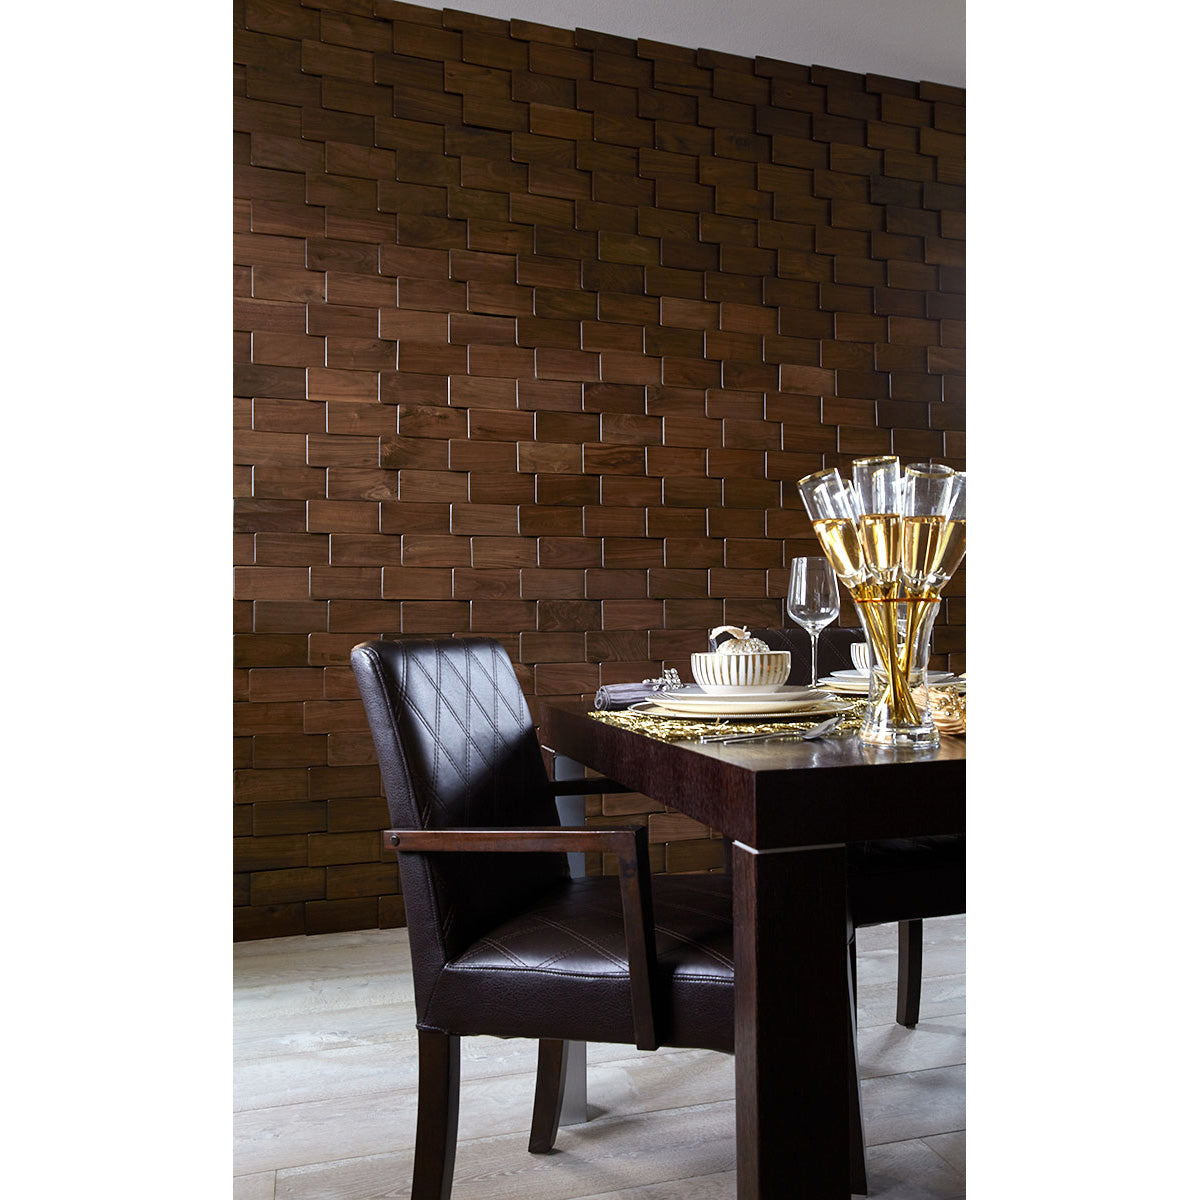 DuChateau - Scale Reckt Wall Coverings - Smoke